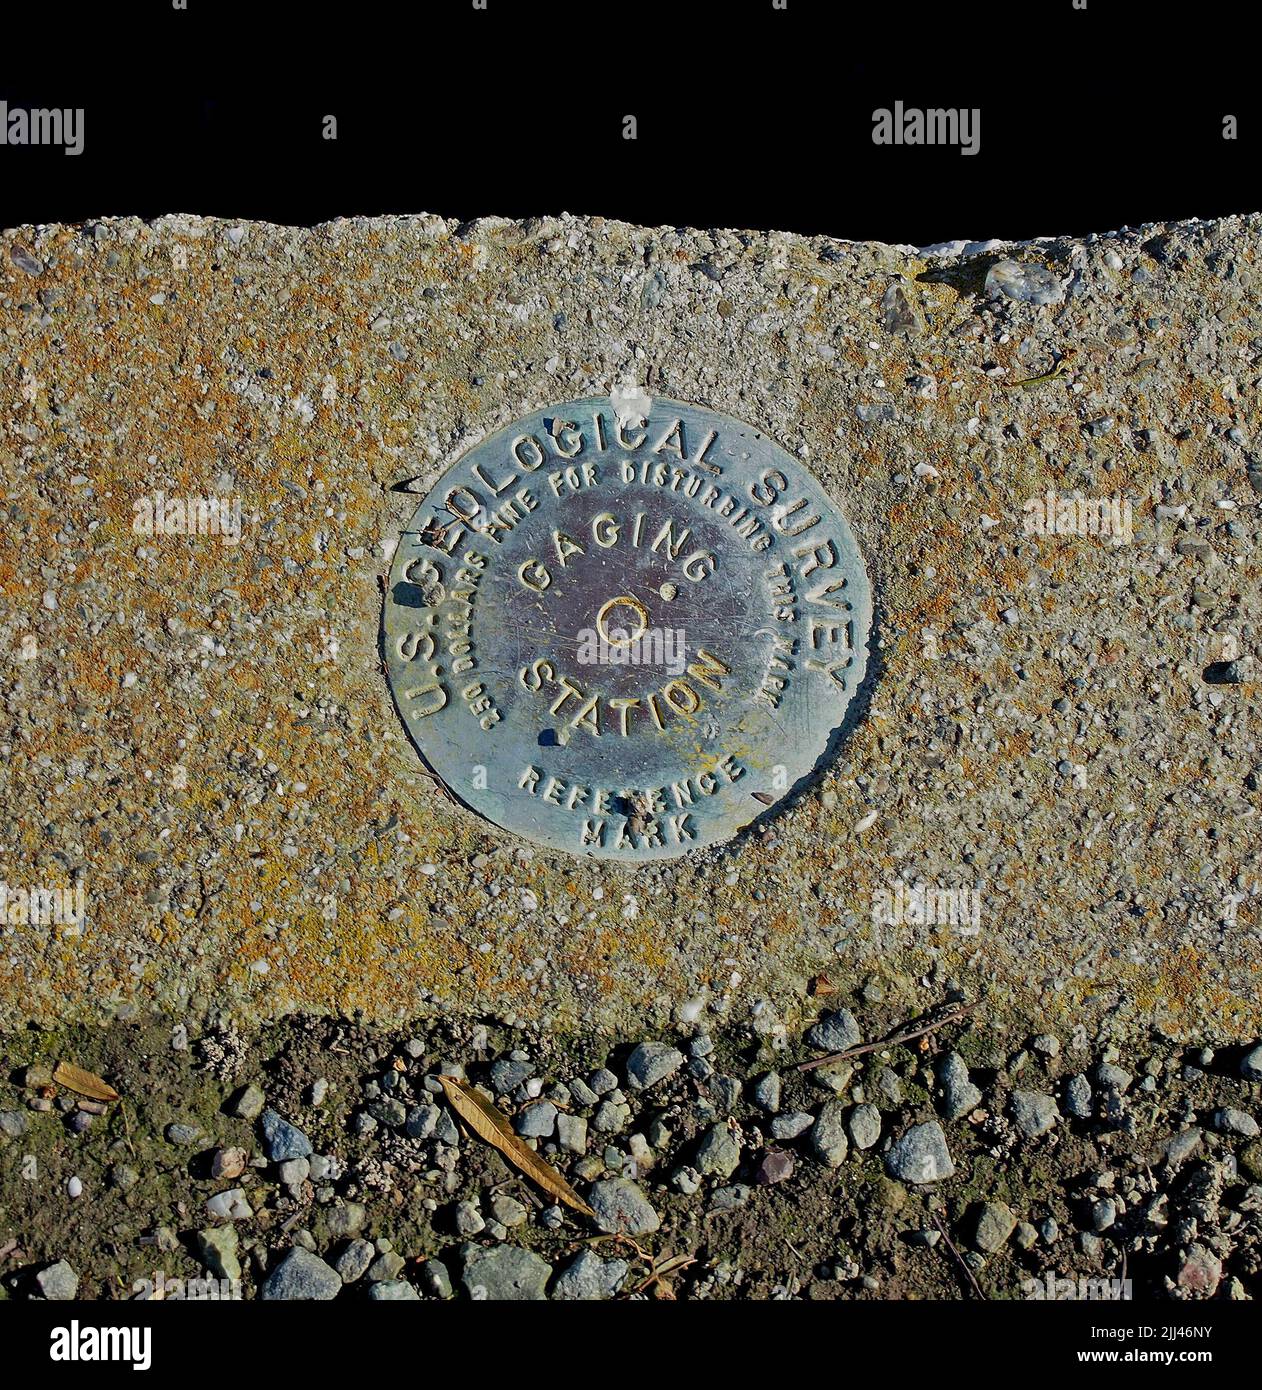 US Geological Survey Gagging Station reference marker, next to Alameda Creek Trail in Union City, California Stock Photo